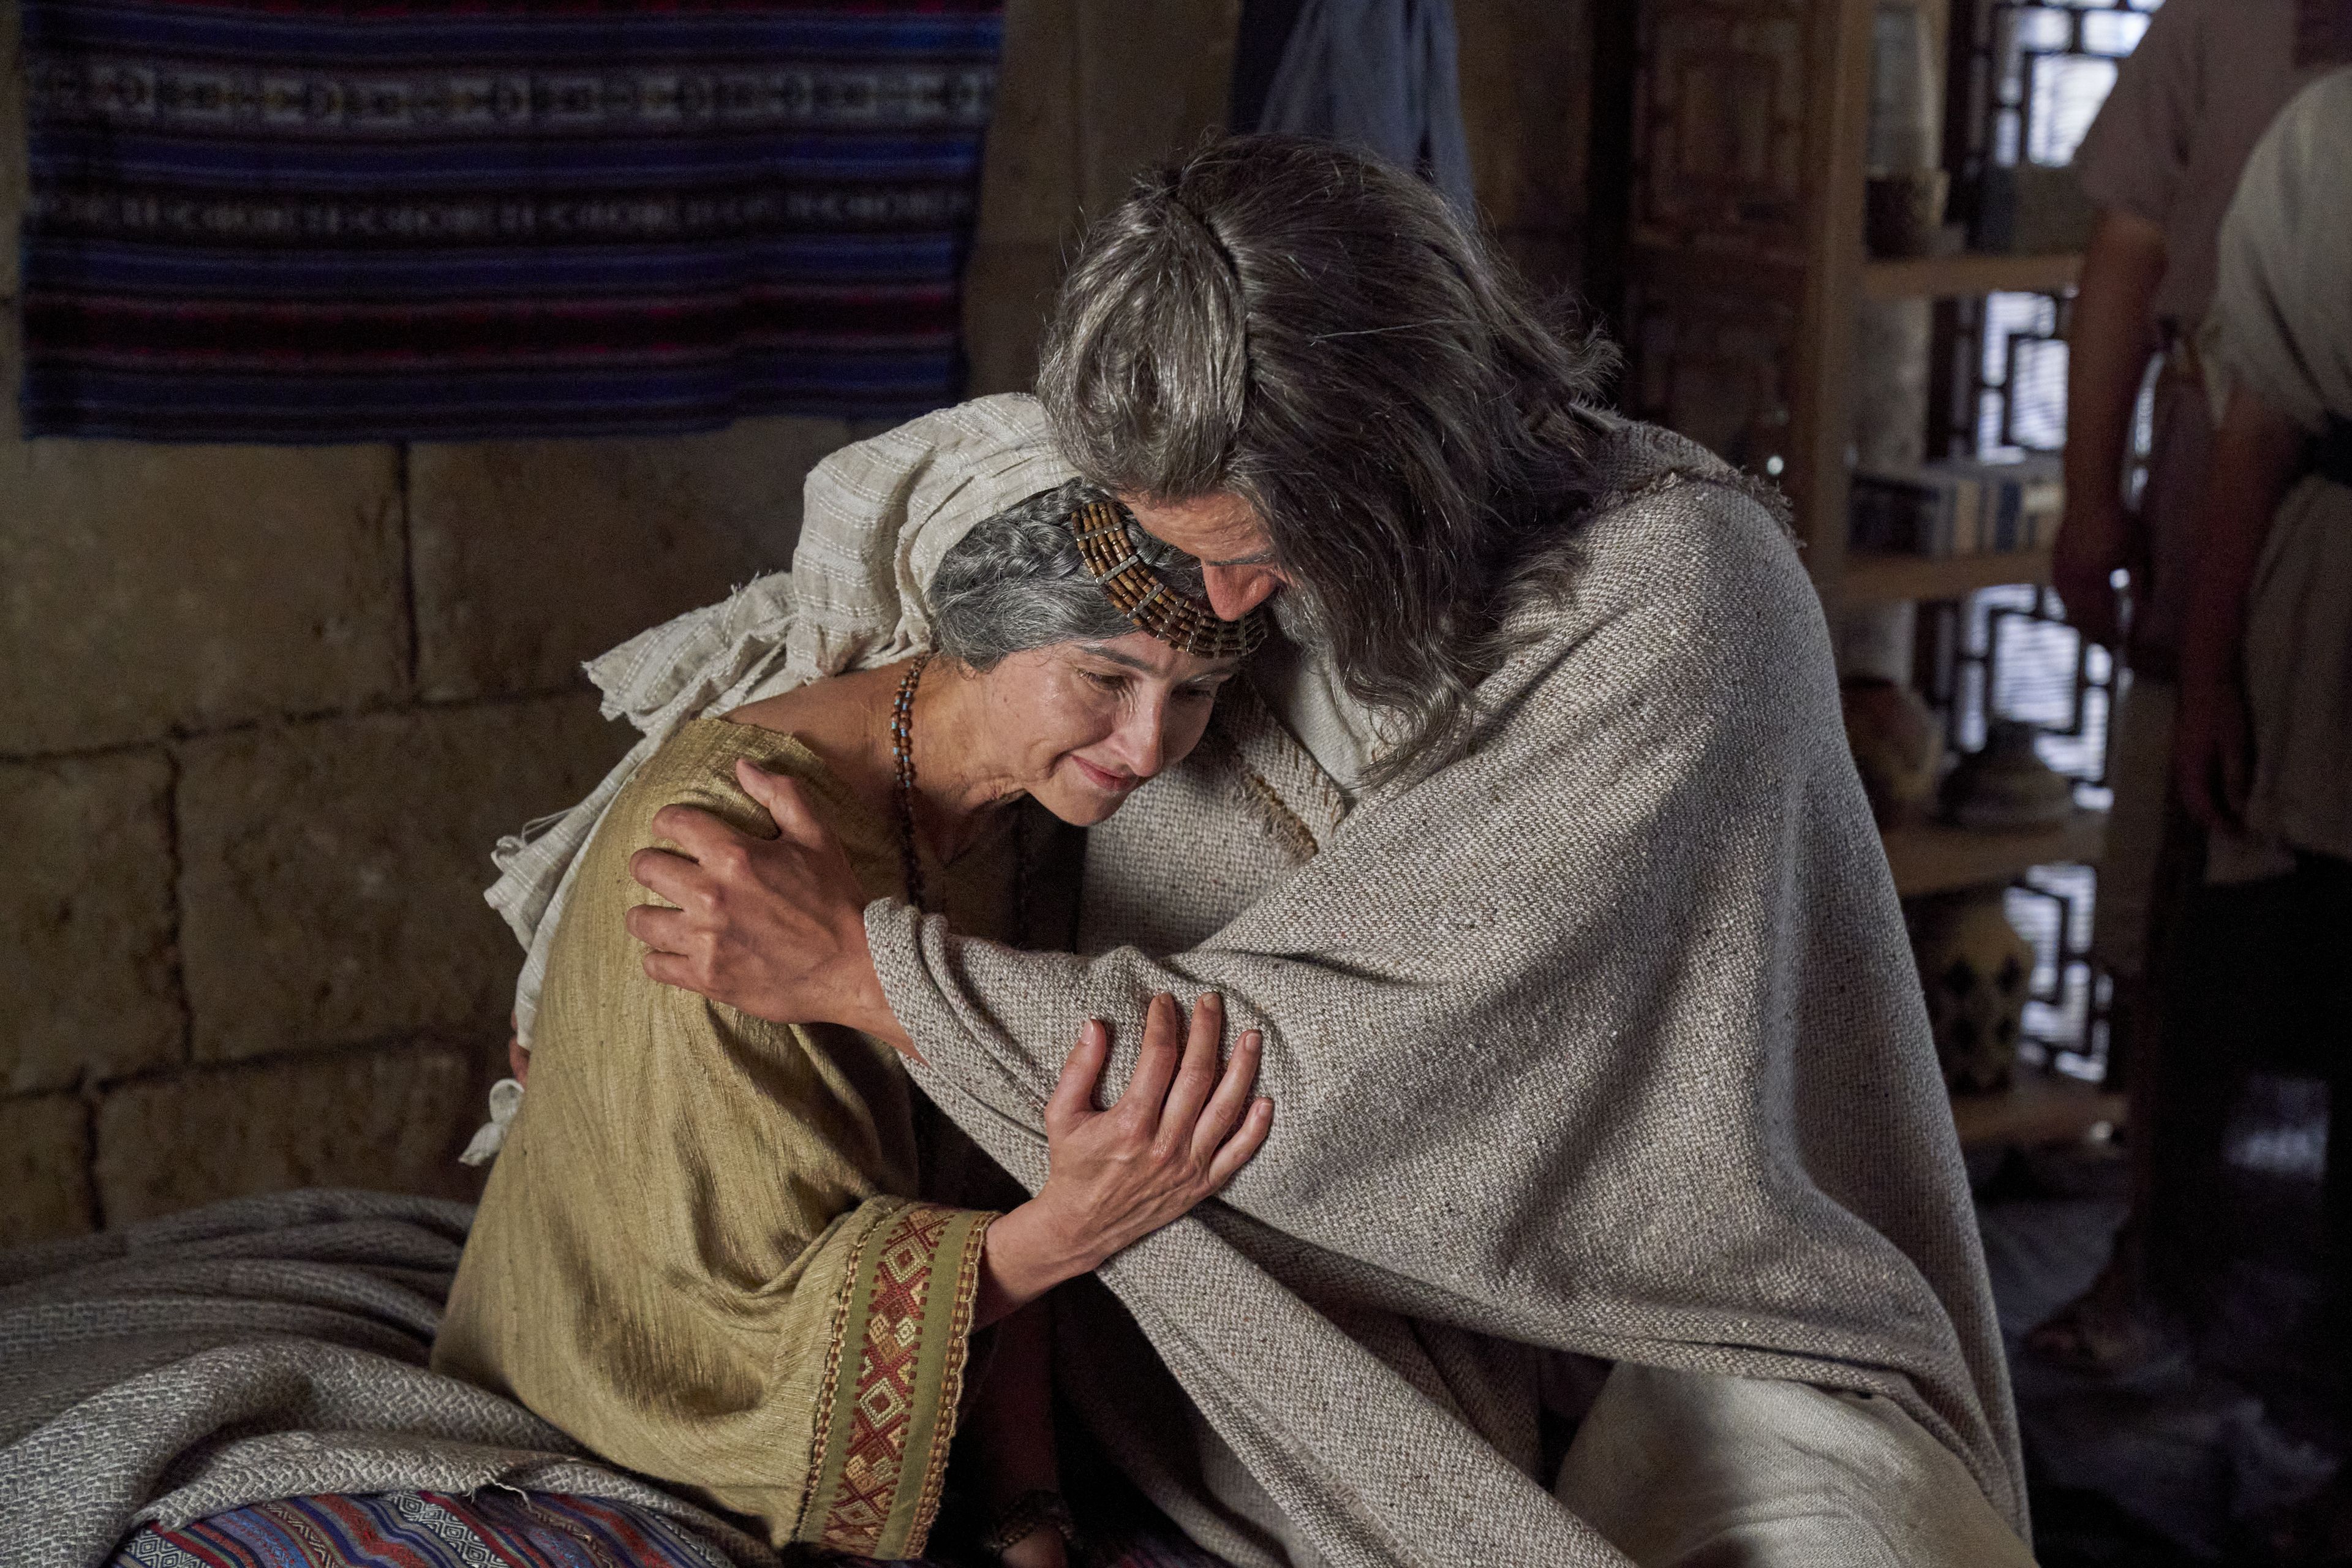 The wife of Alma the Elder and her husband embrace each other after learning of their son's conversion.